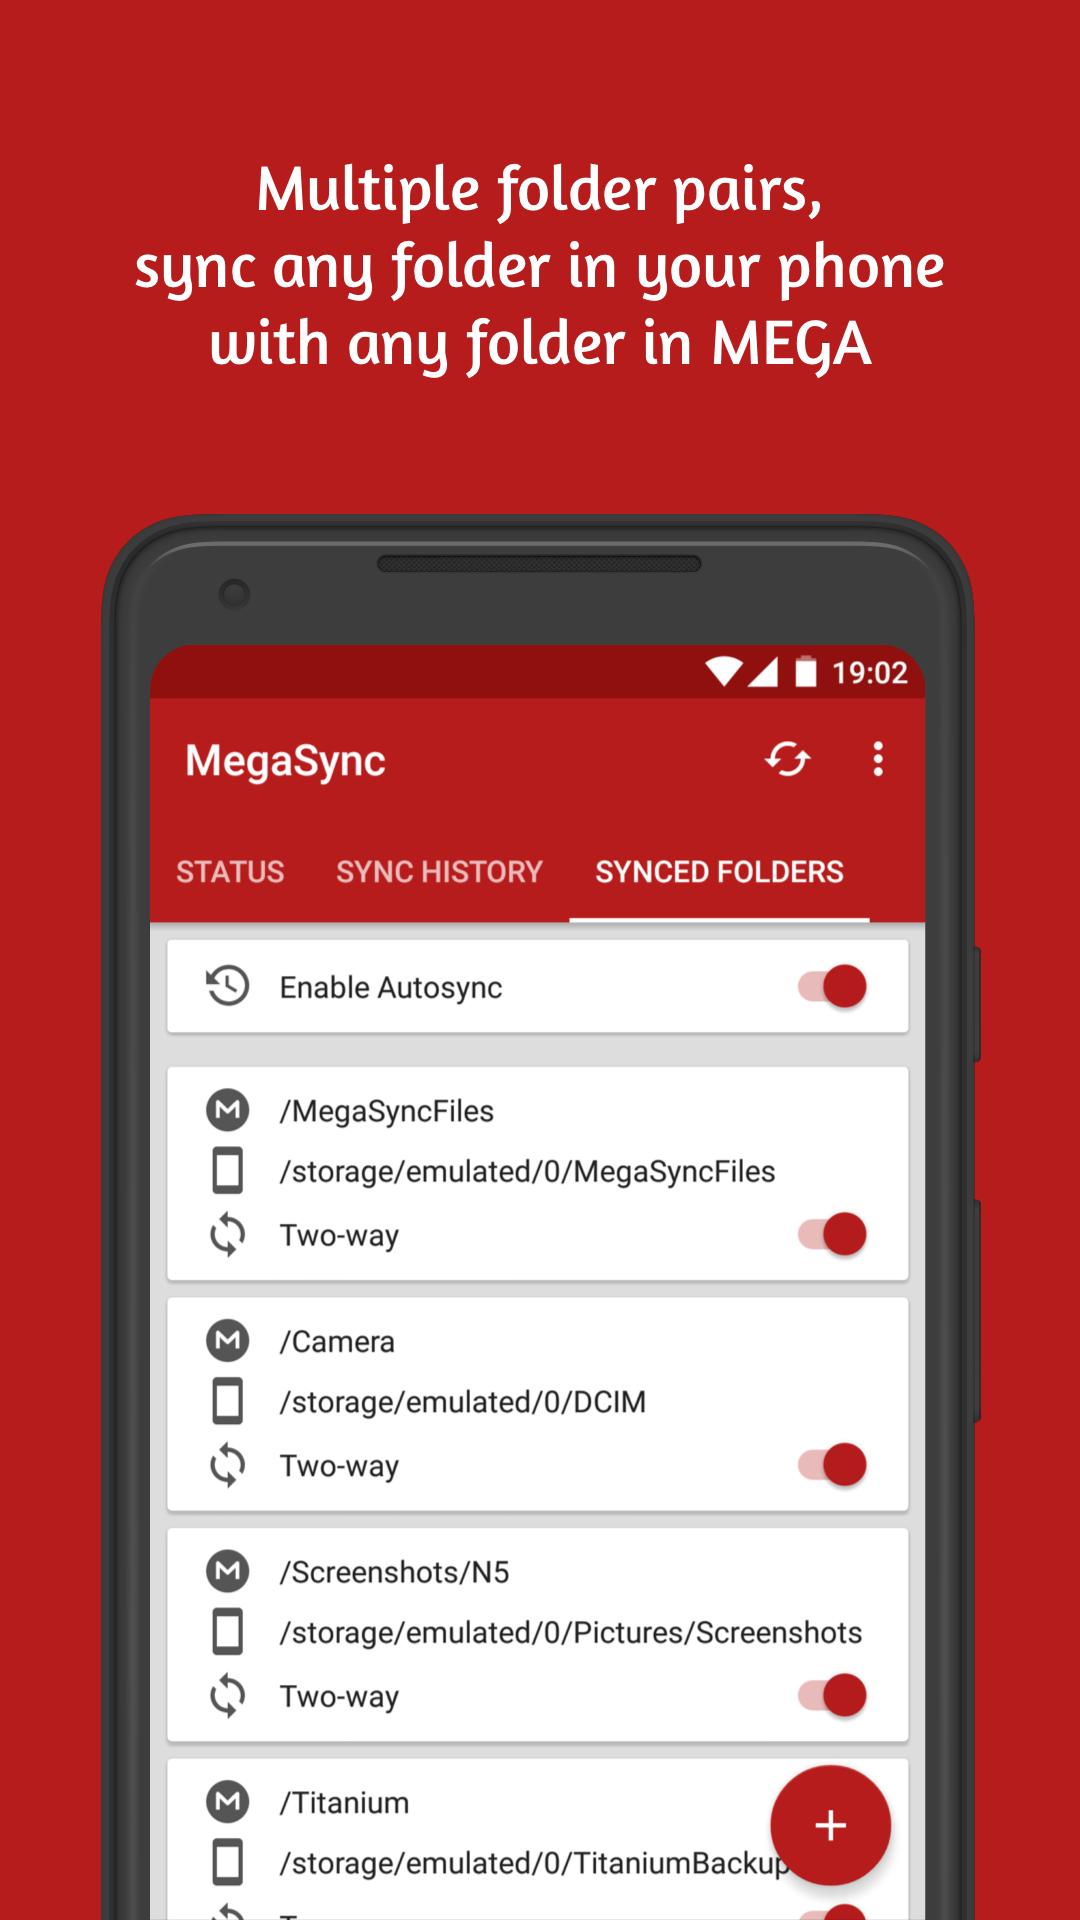 Autosync For Mega - Megasync Apk For Android Download